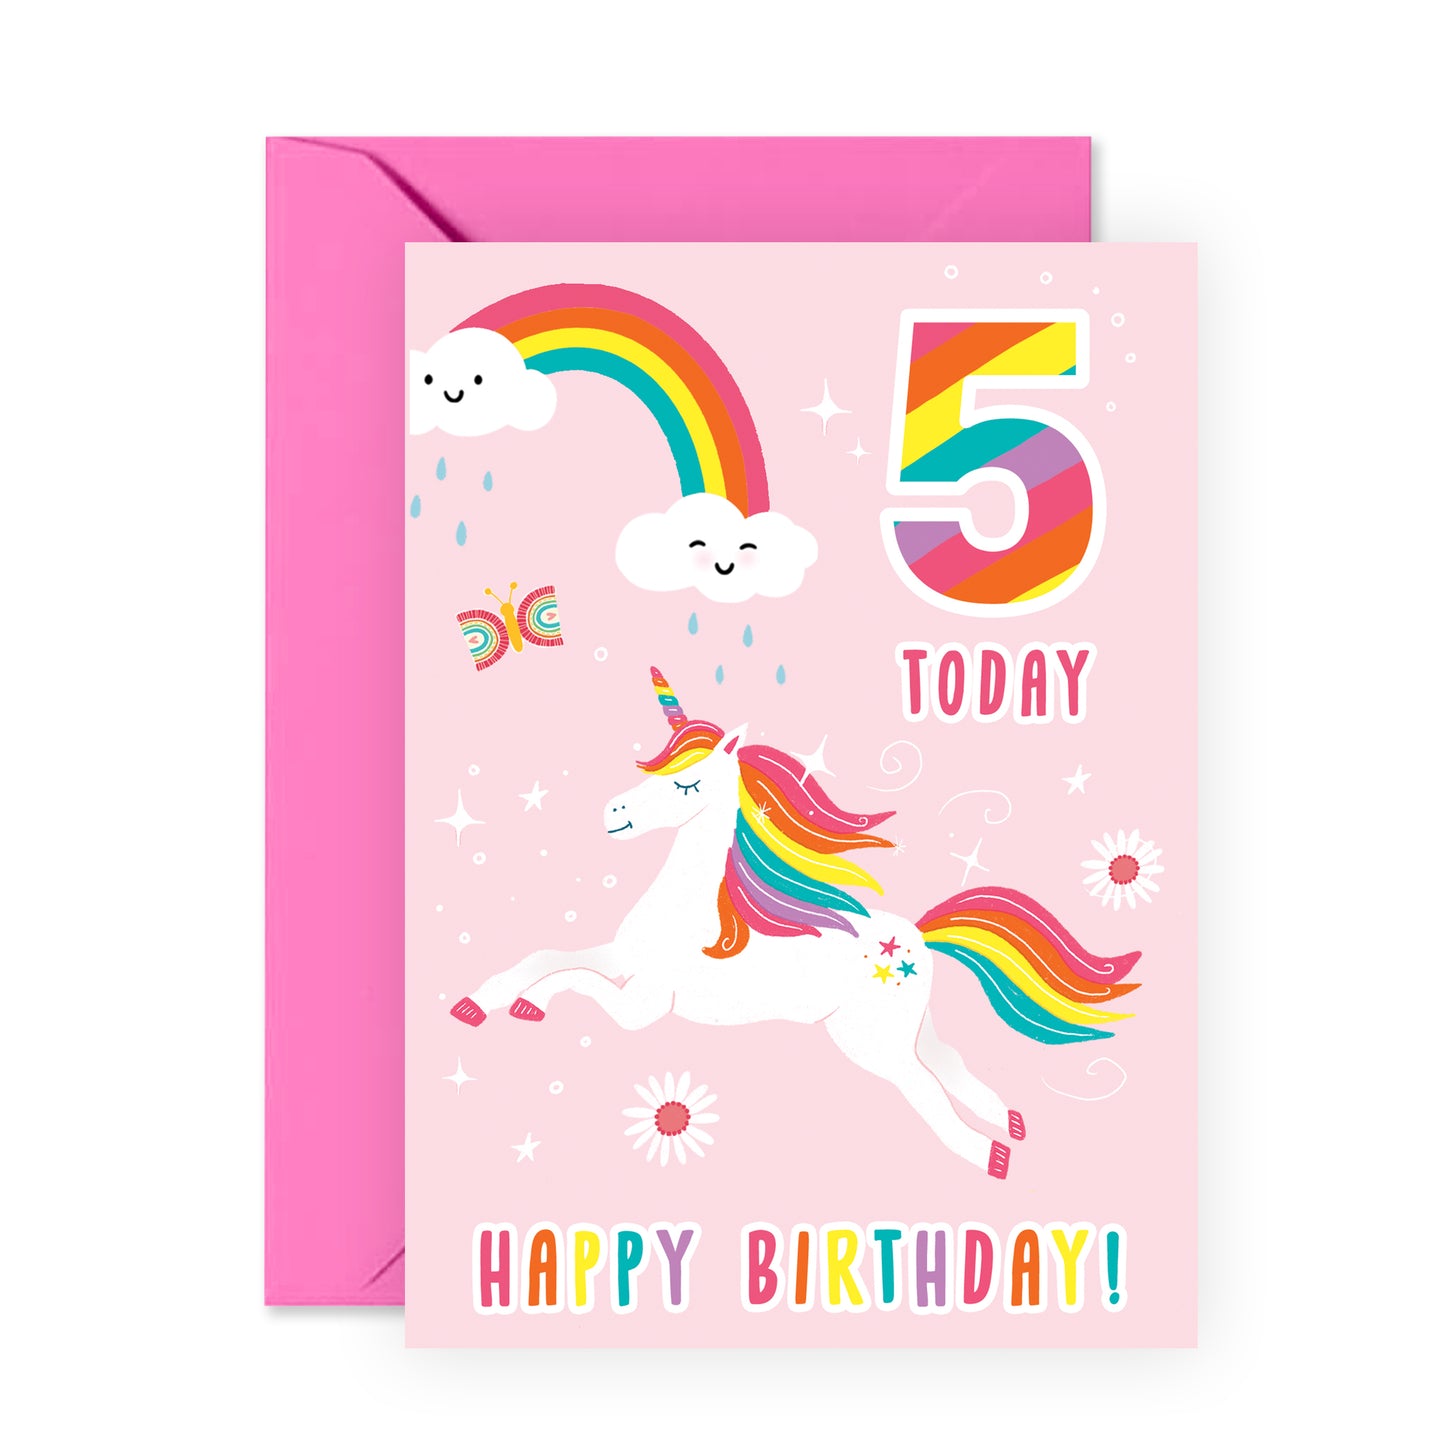 5th Birthday Card - 5 Today Unicorn - For Kids Girls Her